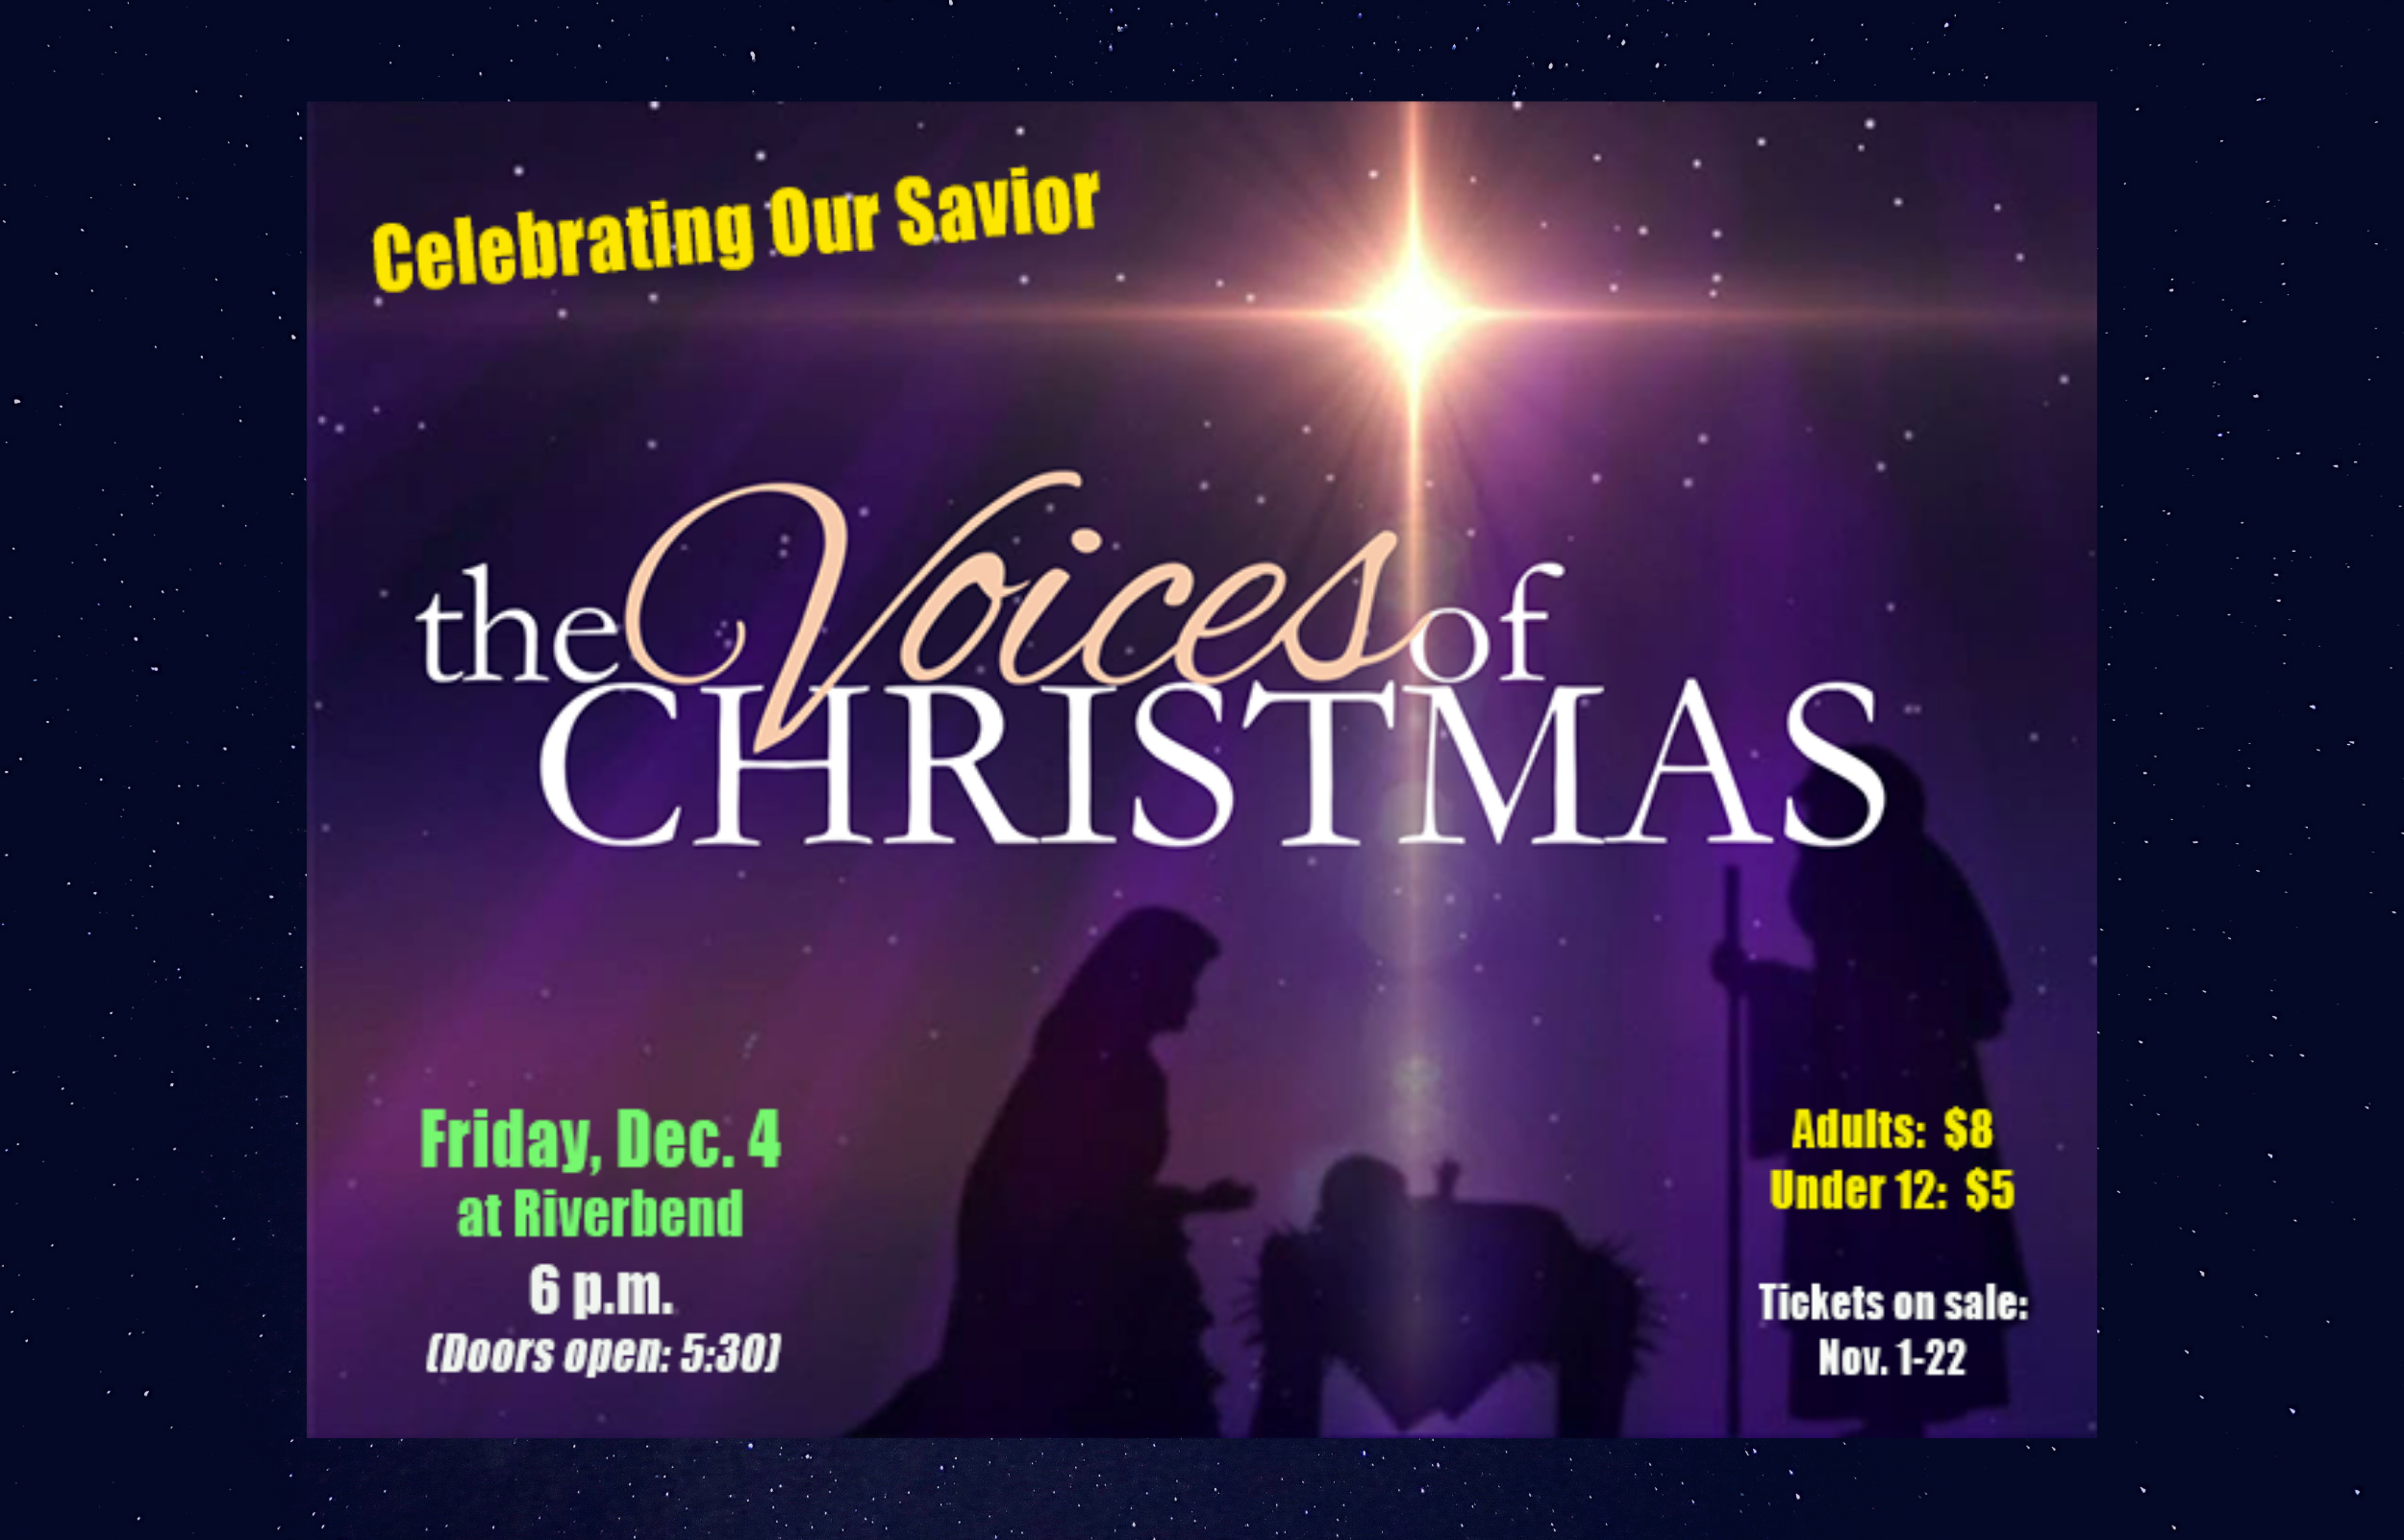 VoicesofChristmas Website image